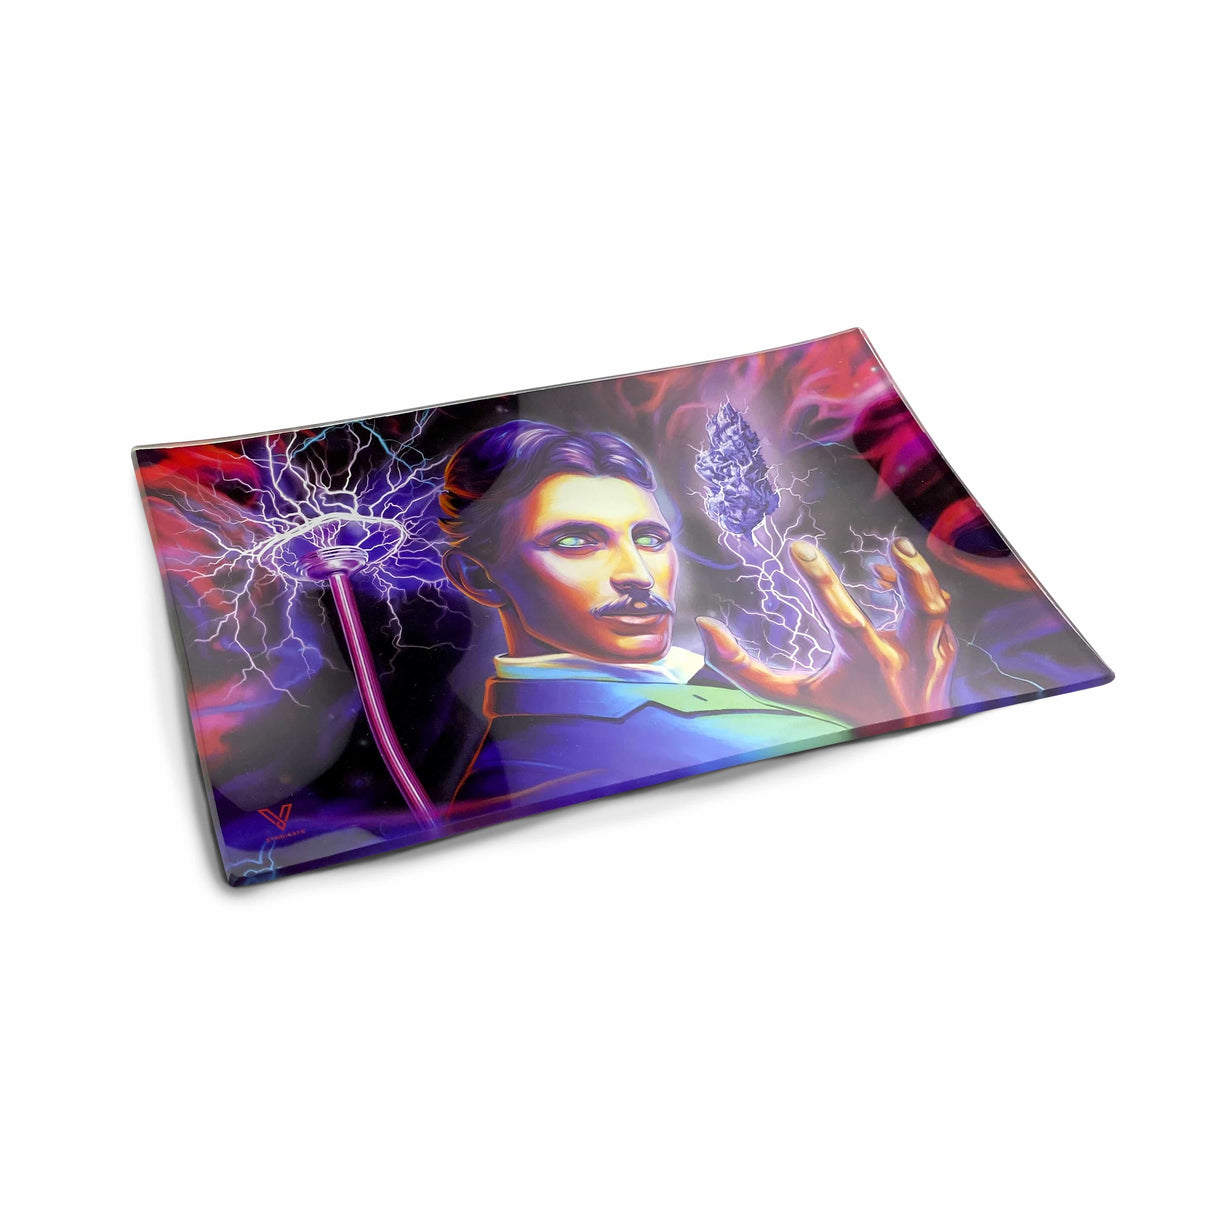 V Syndicate High Voltage Glass Rollin' Tray with vibrant Tesla-themed design, medium size, angled view